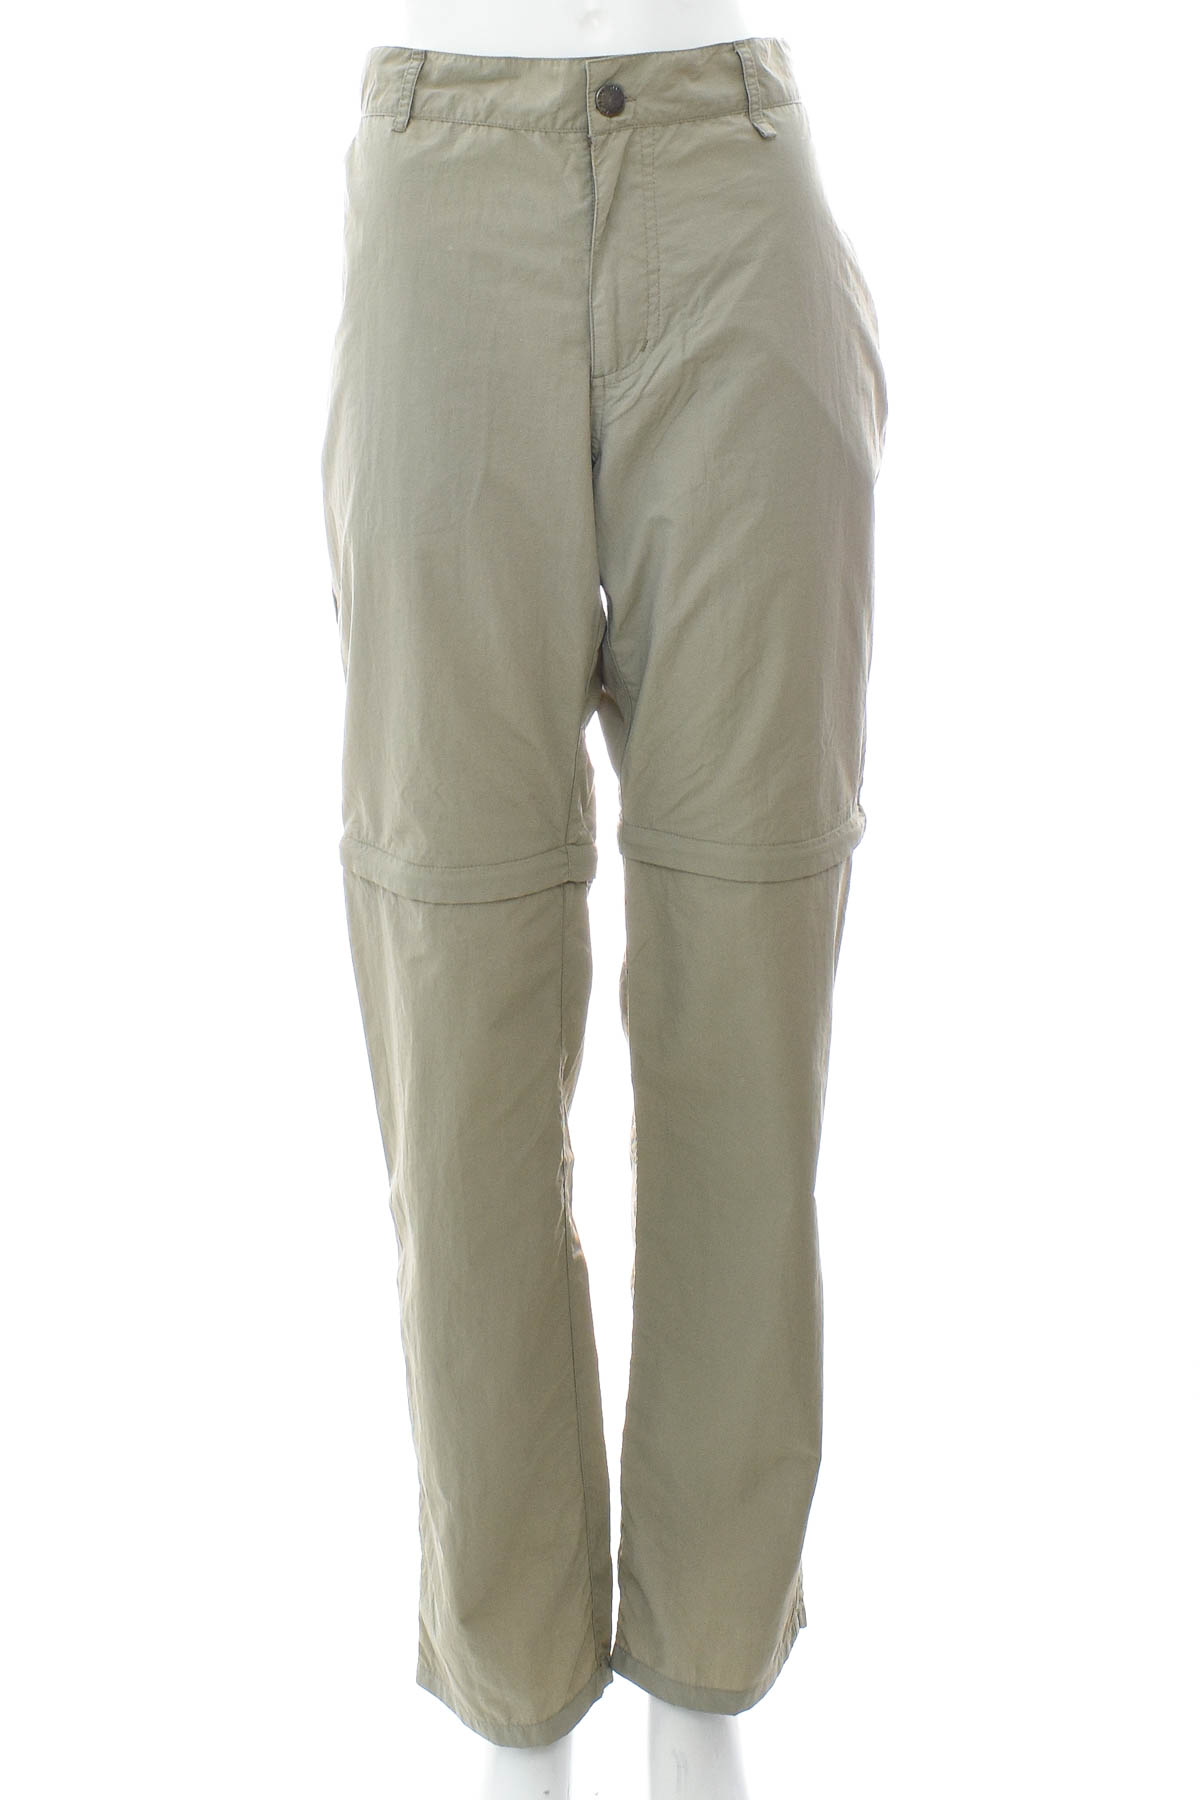 Women's trousers - Outdoor PERFORMANCE by Tchibo - 0